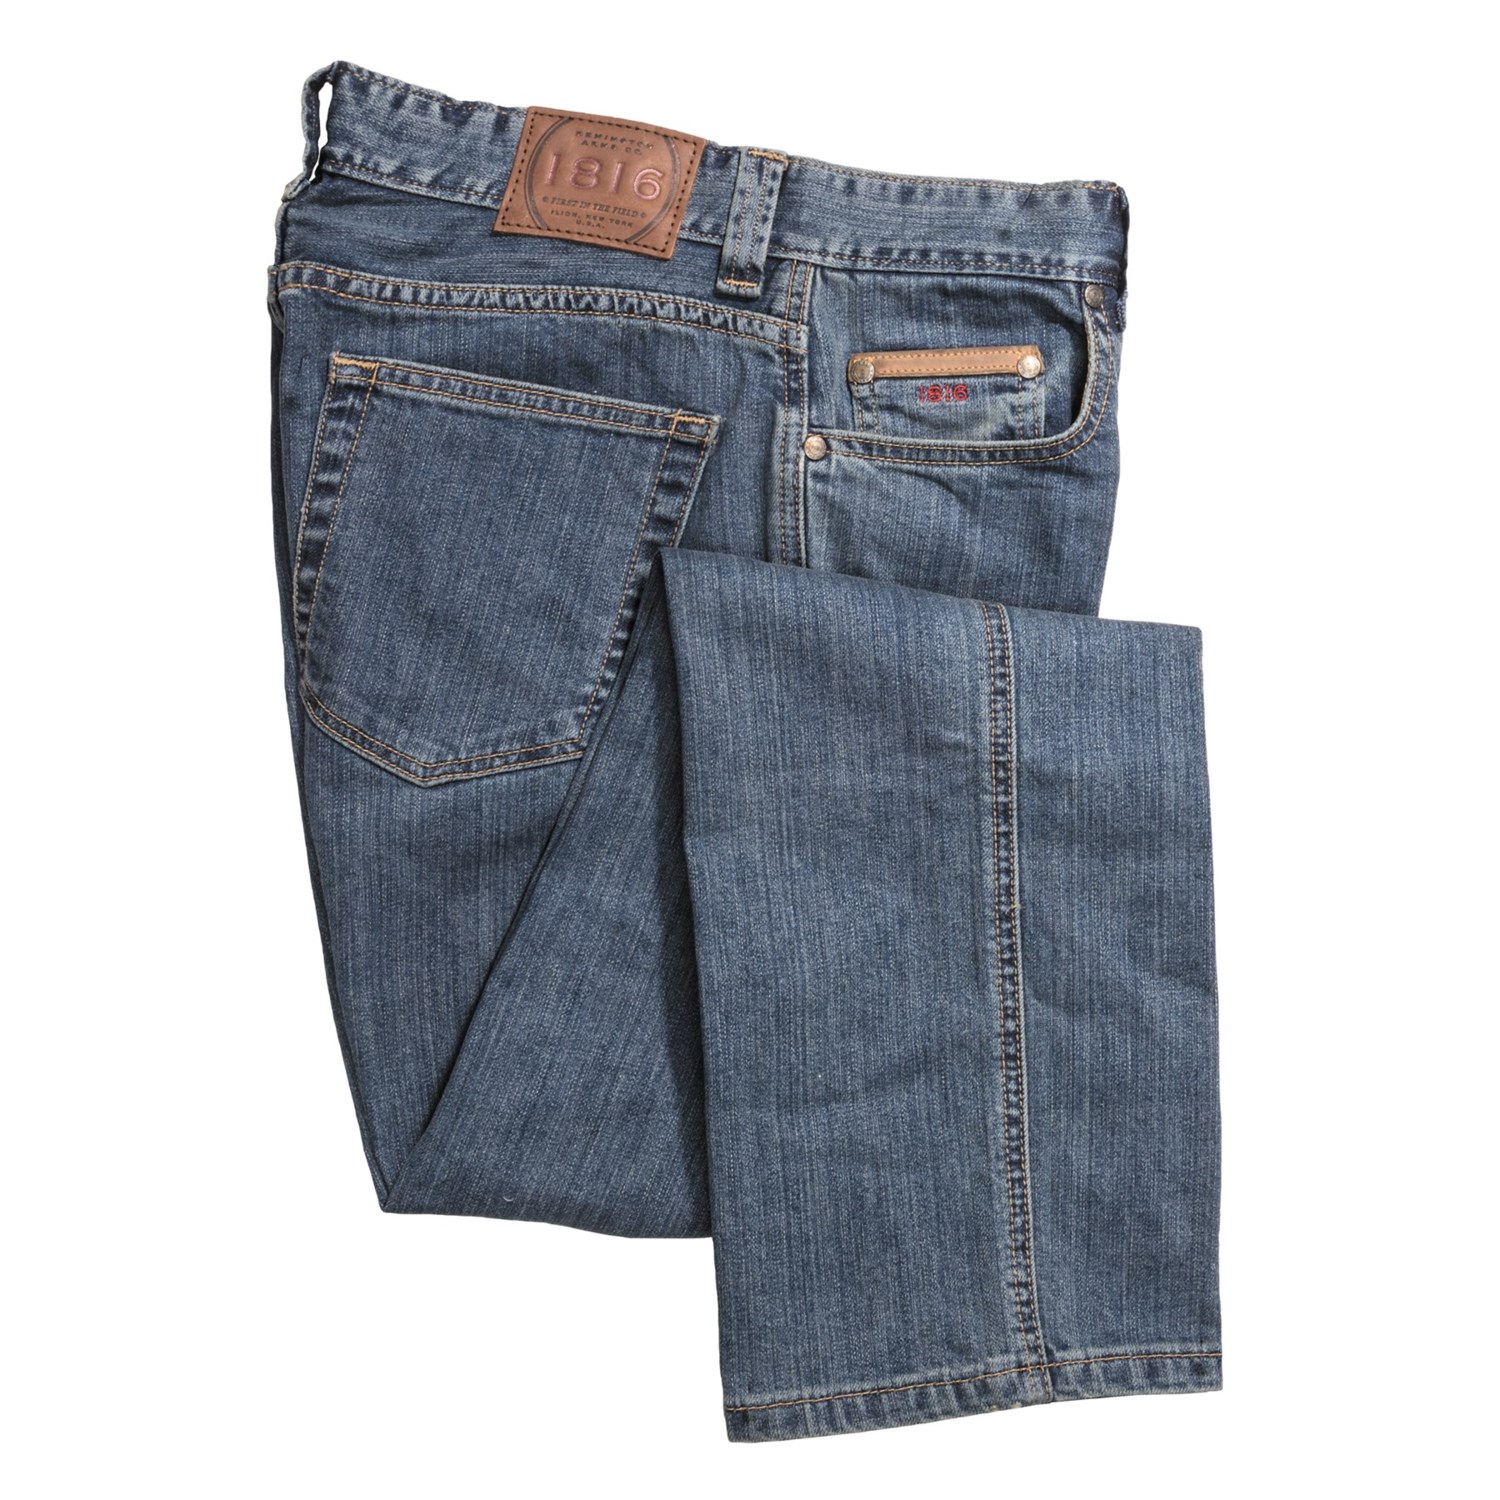 1816 by Remington Jeans (For Men) - Save 85%